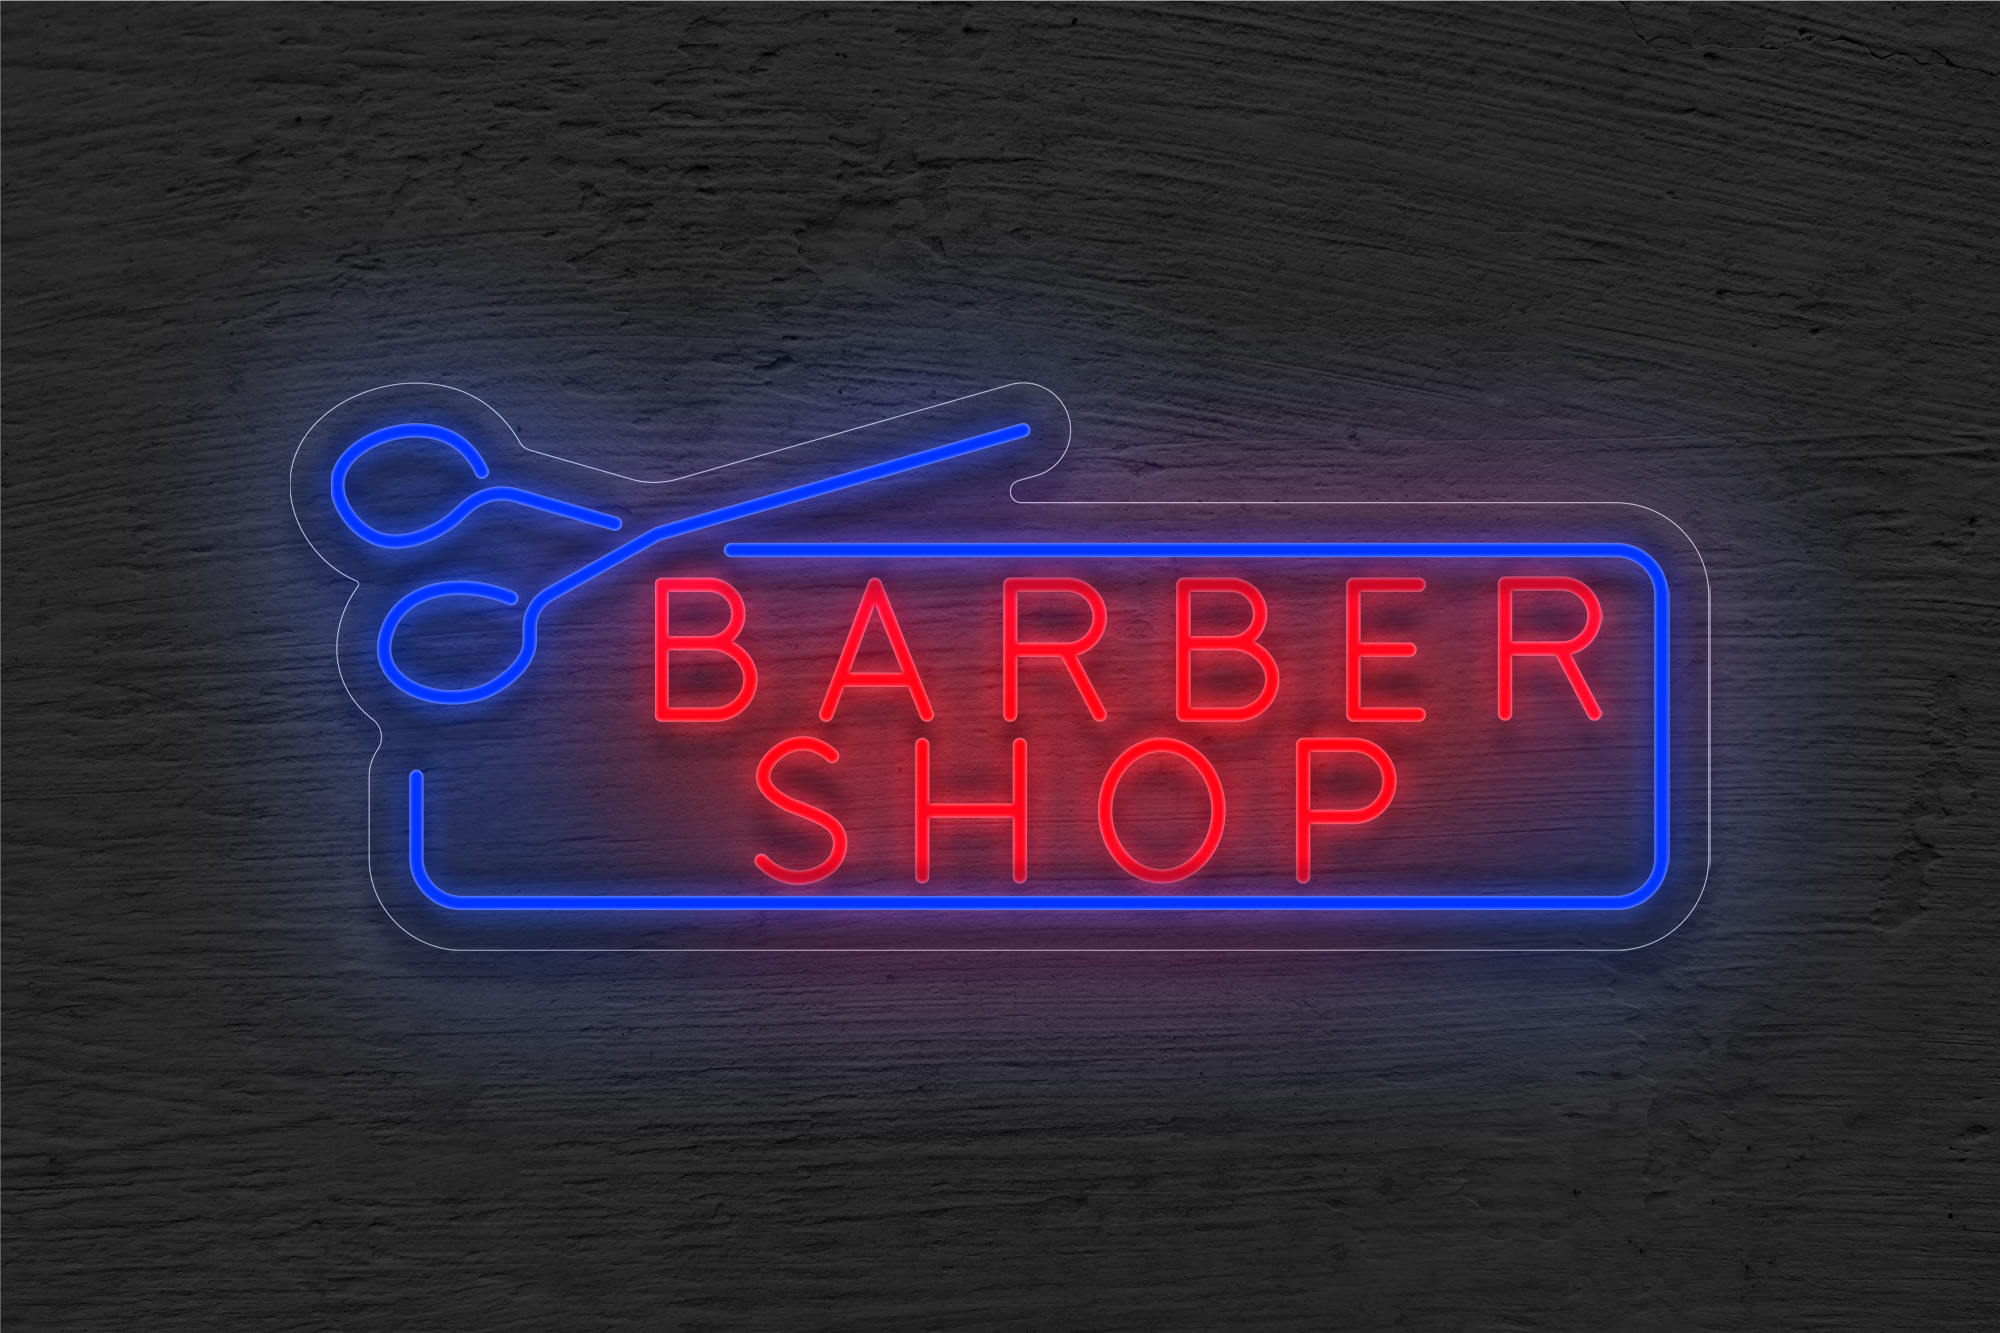 "Barber Shop" with Border and Scissor LED Neon Sign